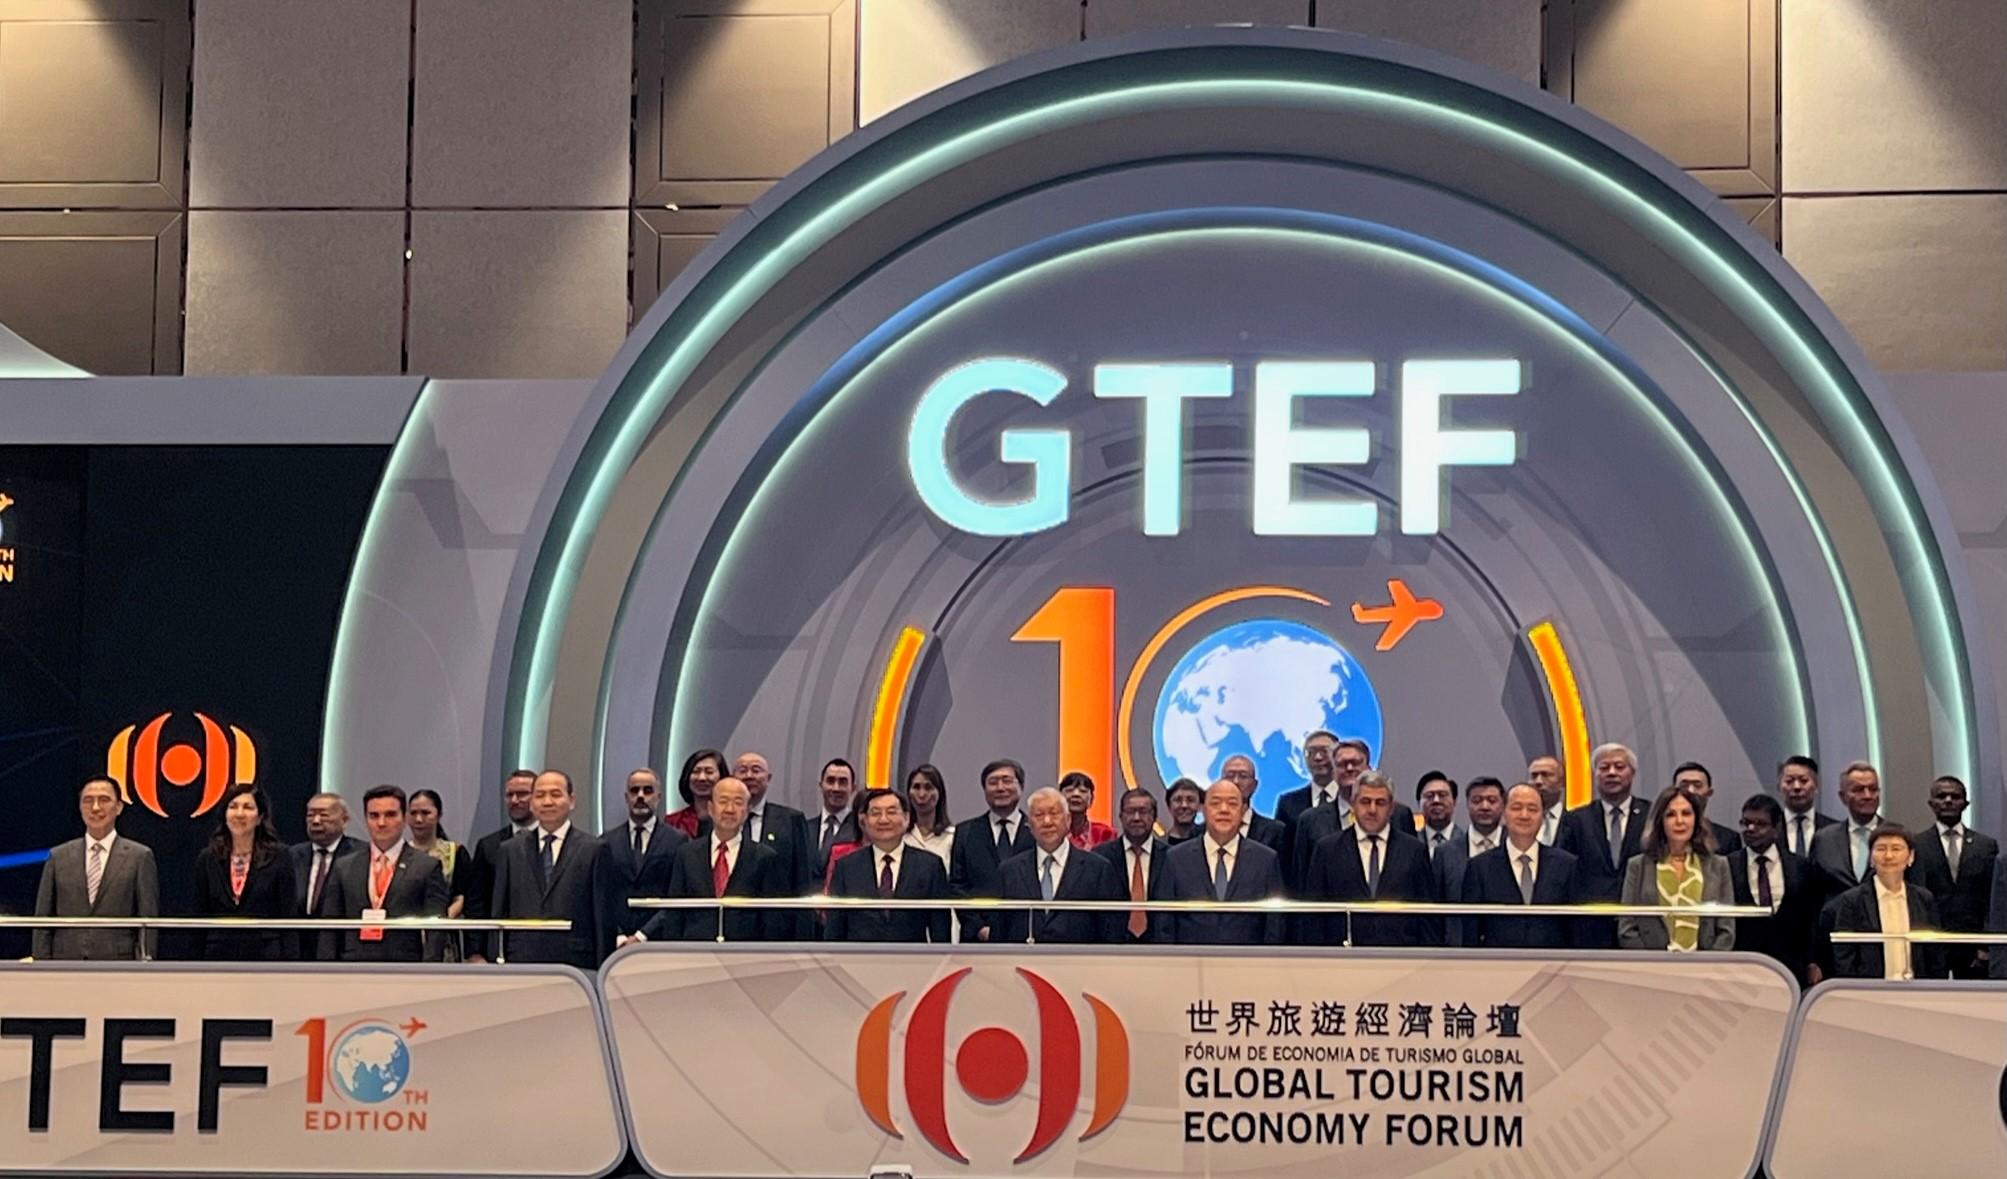 The Secretary for Culture, Sports and Tourism, Mr Kevin Yeung, this morning (September 21) attended the 10th Global Tourism Economy Forum • Macao 2023 Opening Ceremony in Macao. Photo shows Mr Yeung (front row, first left), the Minister of Culture and Tourism and Honorary Chairman of Global Tourism Economy Forum, Mr Hu Heping (front row, sixth left), and other guests at the opening ceremony.